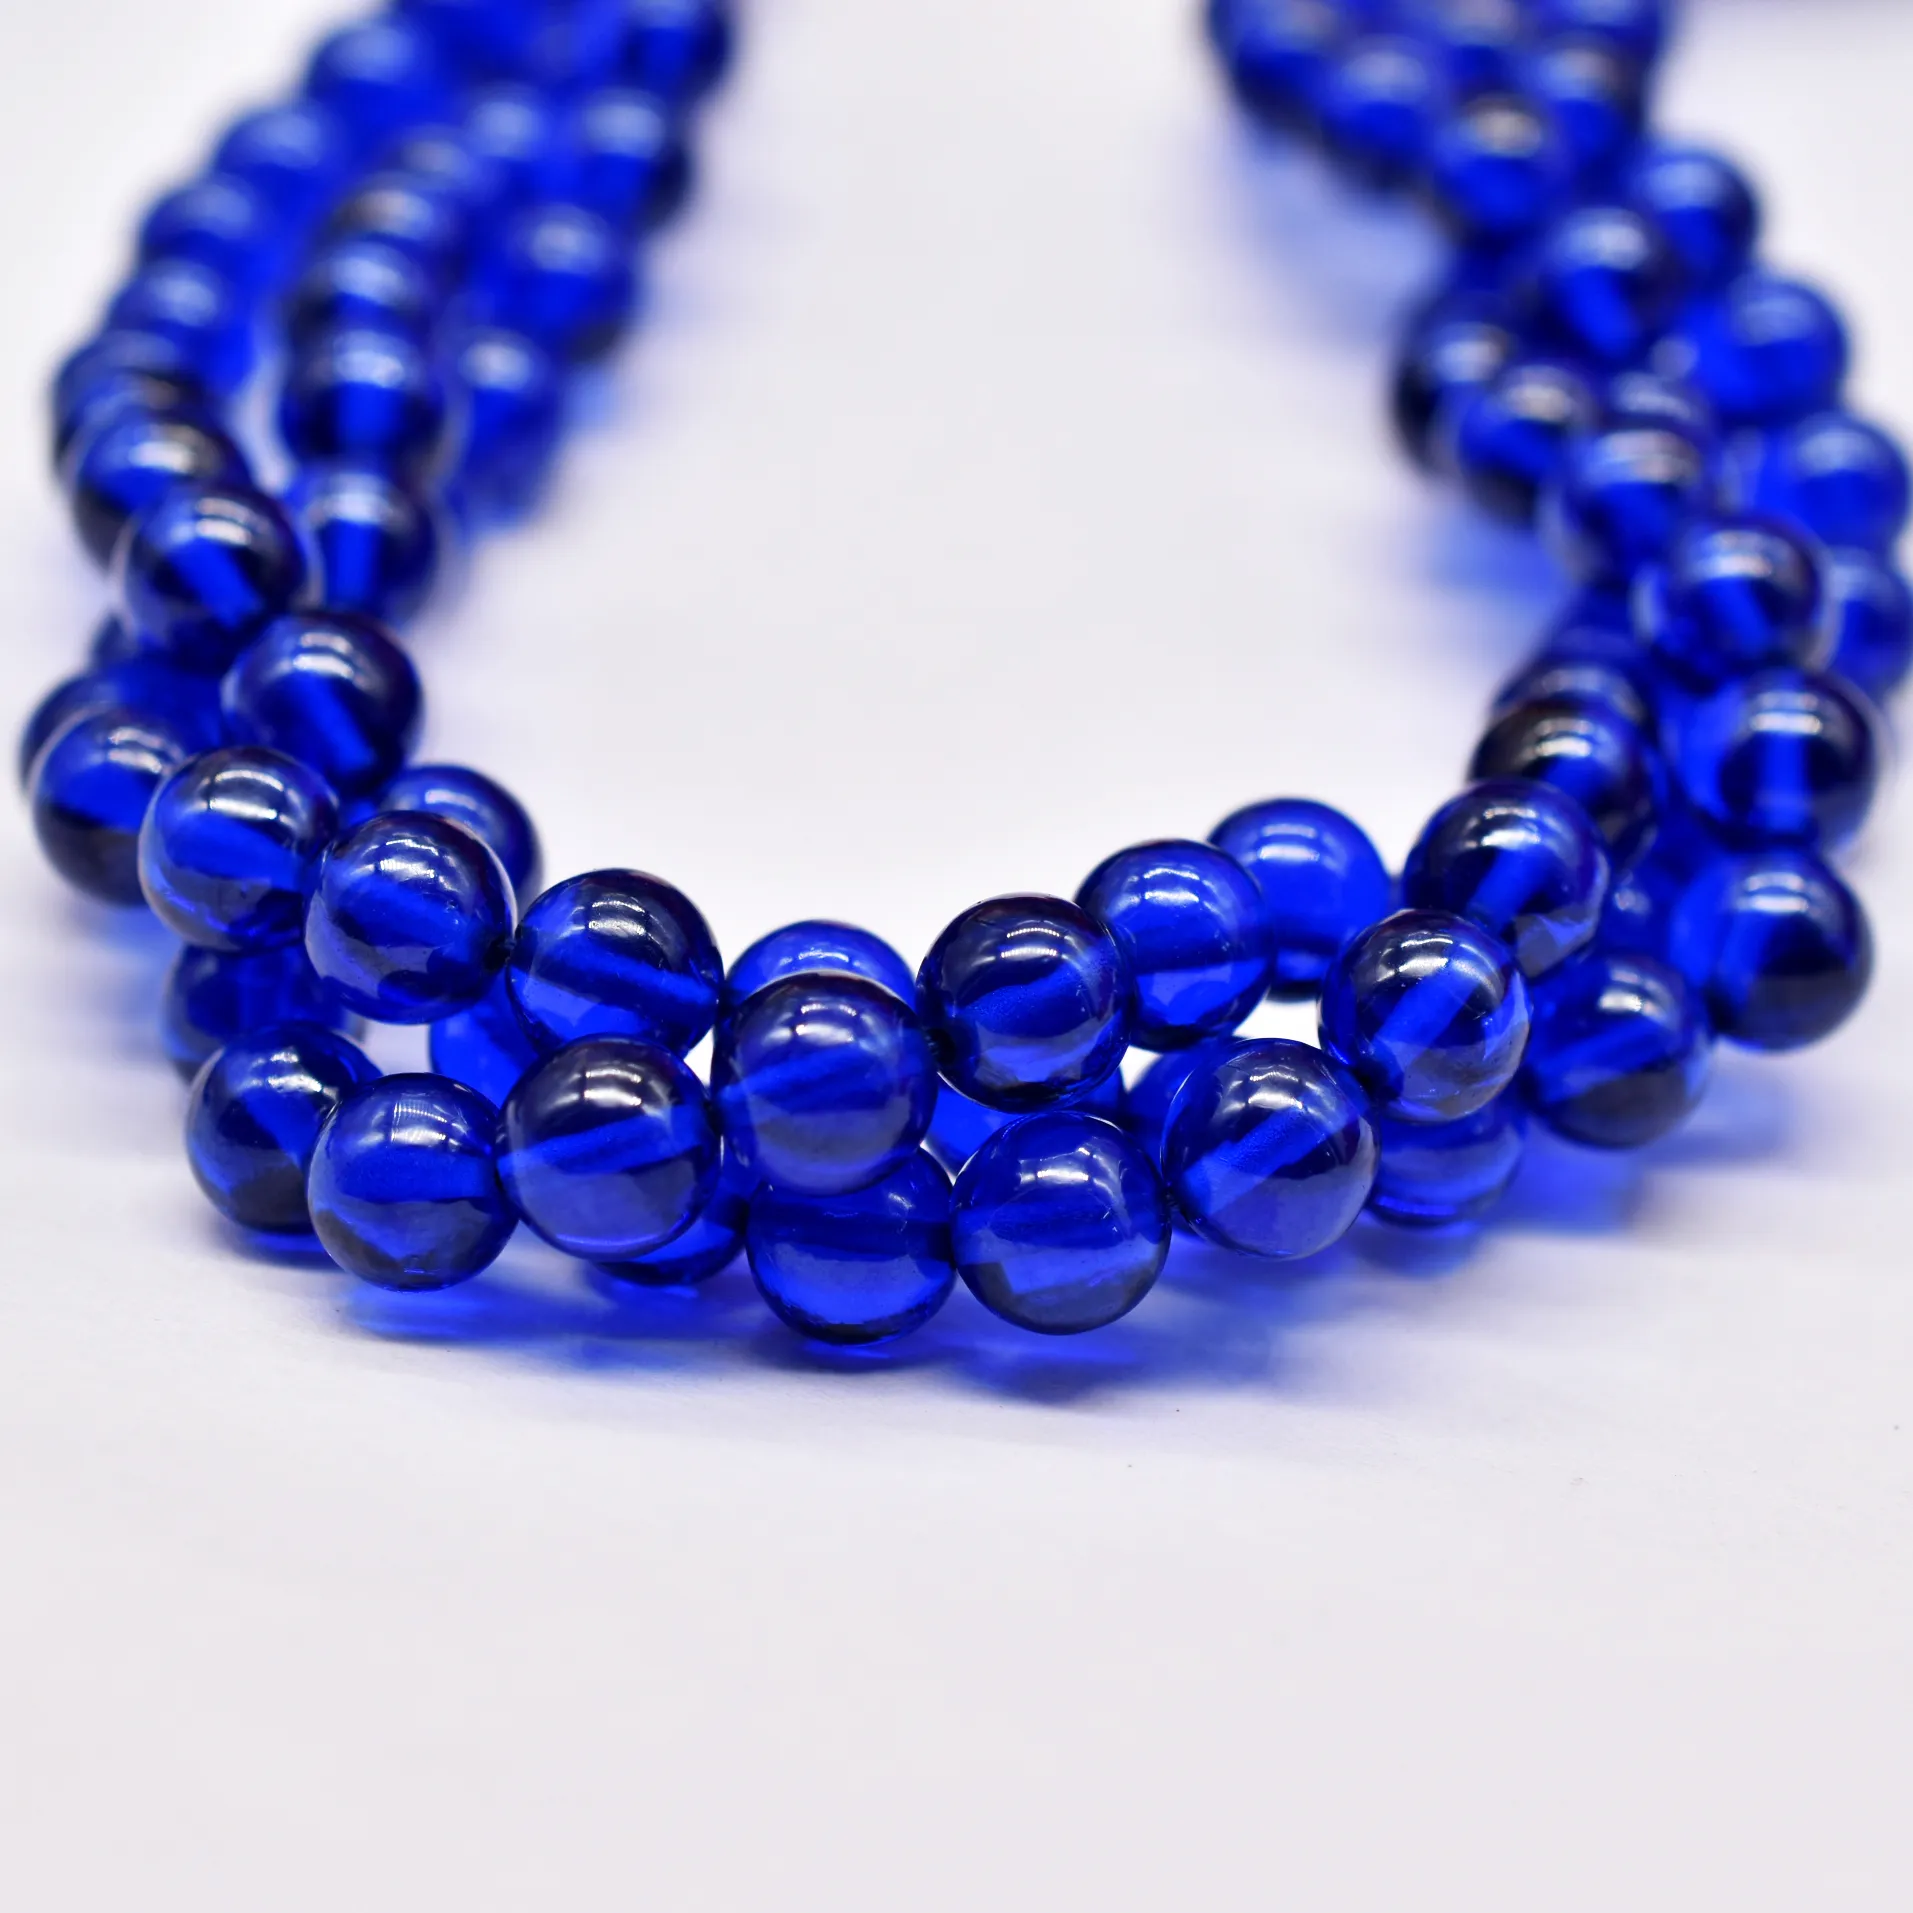 Lab Grown Blue Sapphire Beads 6MM Round Beads Drilled stones For Necklace Jewelry Blue Sapphire Necklace